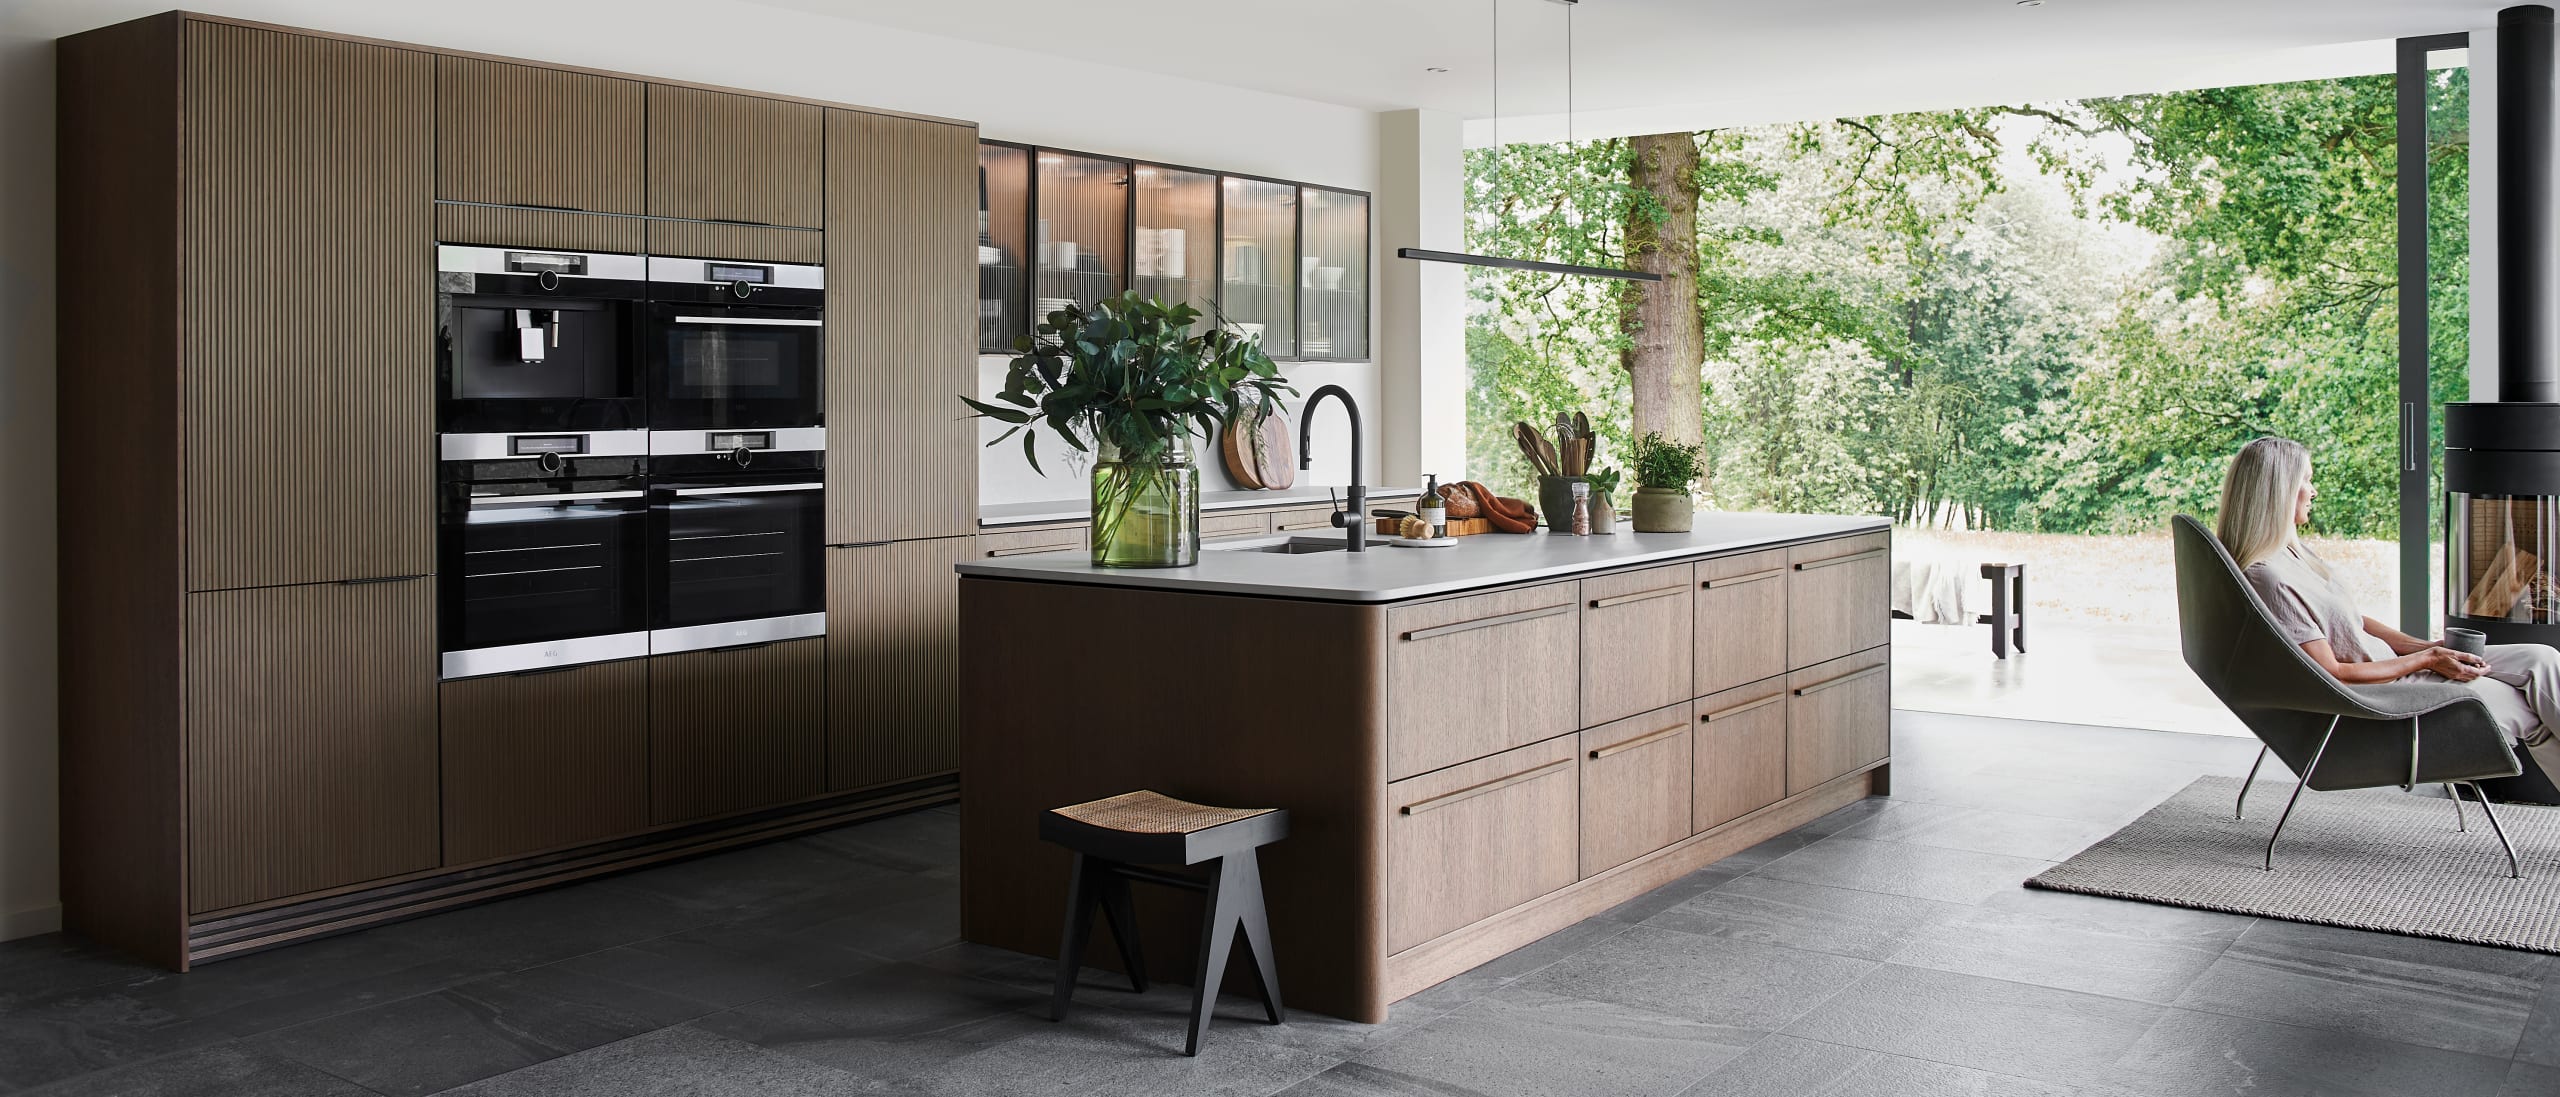 Magnet Kitchens 2021 Nordic Nature range with Fluted oak doors and Integra Hoxton Pebble cabinets with Dekton Aeri worktop. U-shaped kitchen with breakfast bar area.